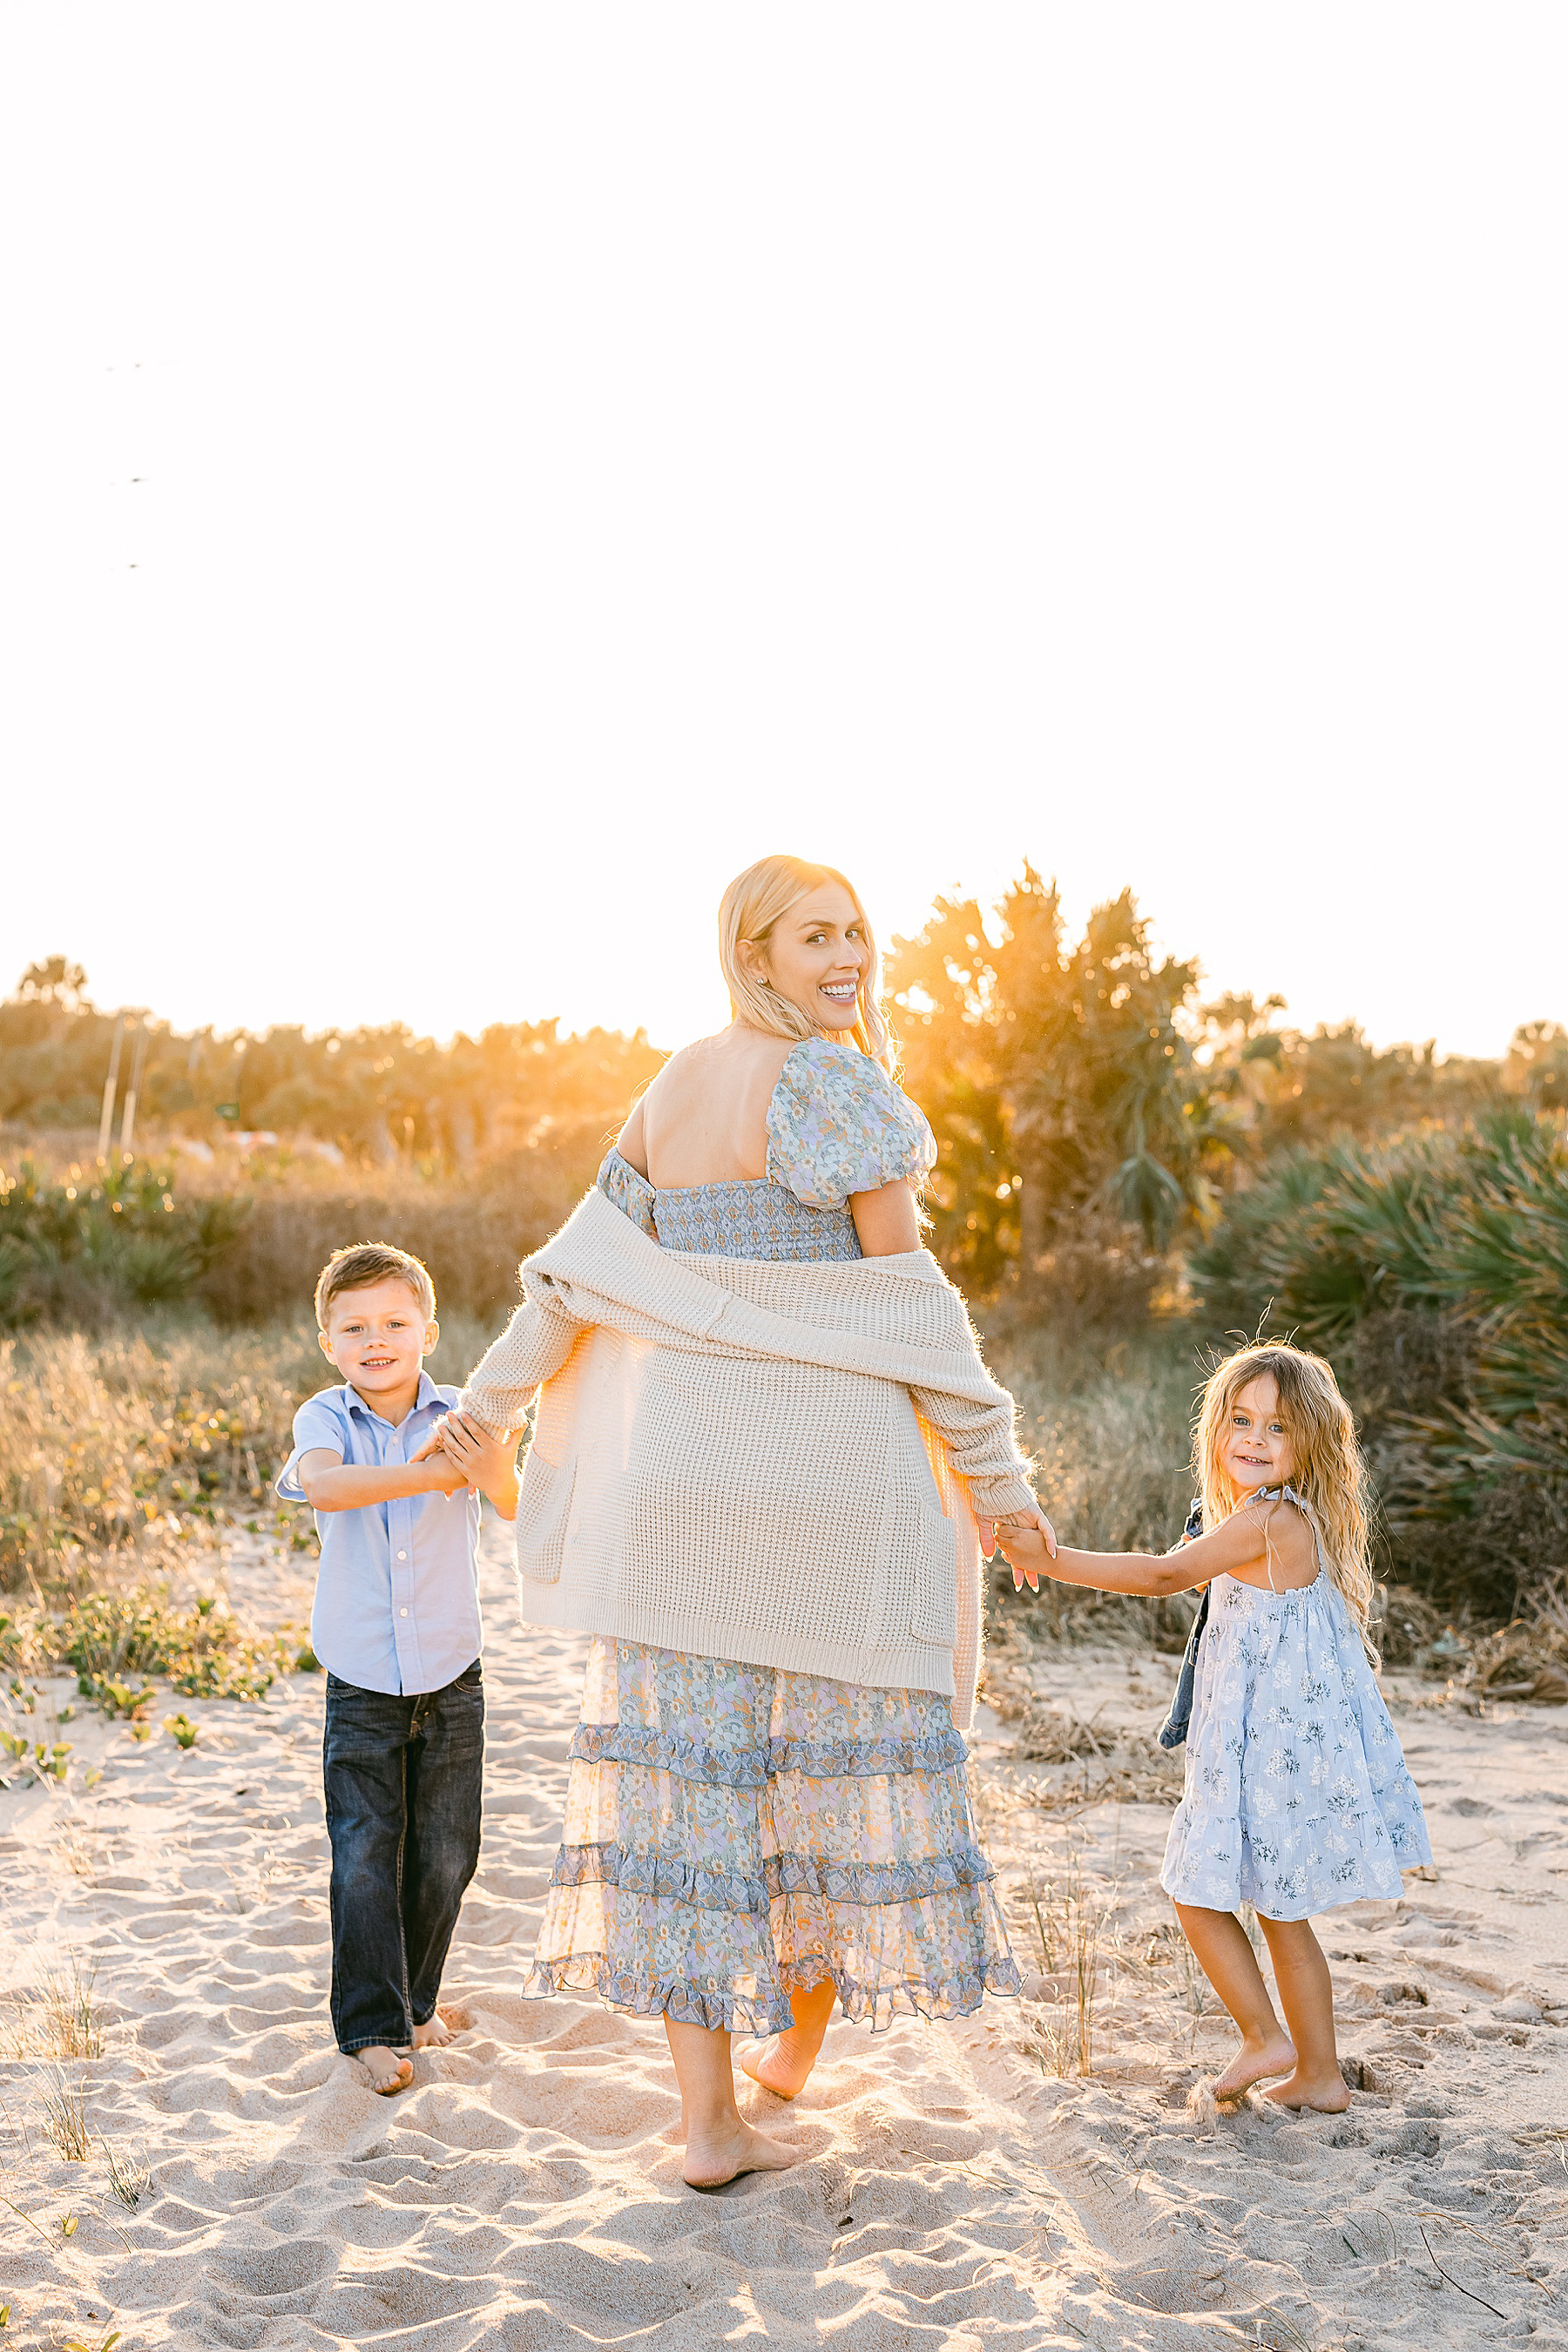 blond woman walking on the sand with two children in coordinating clothing